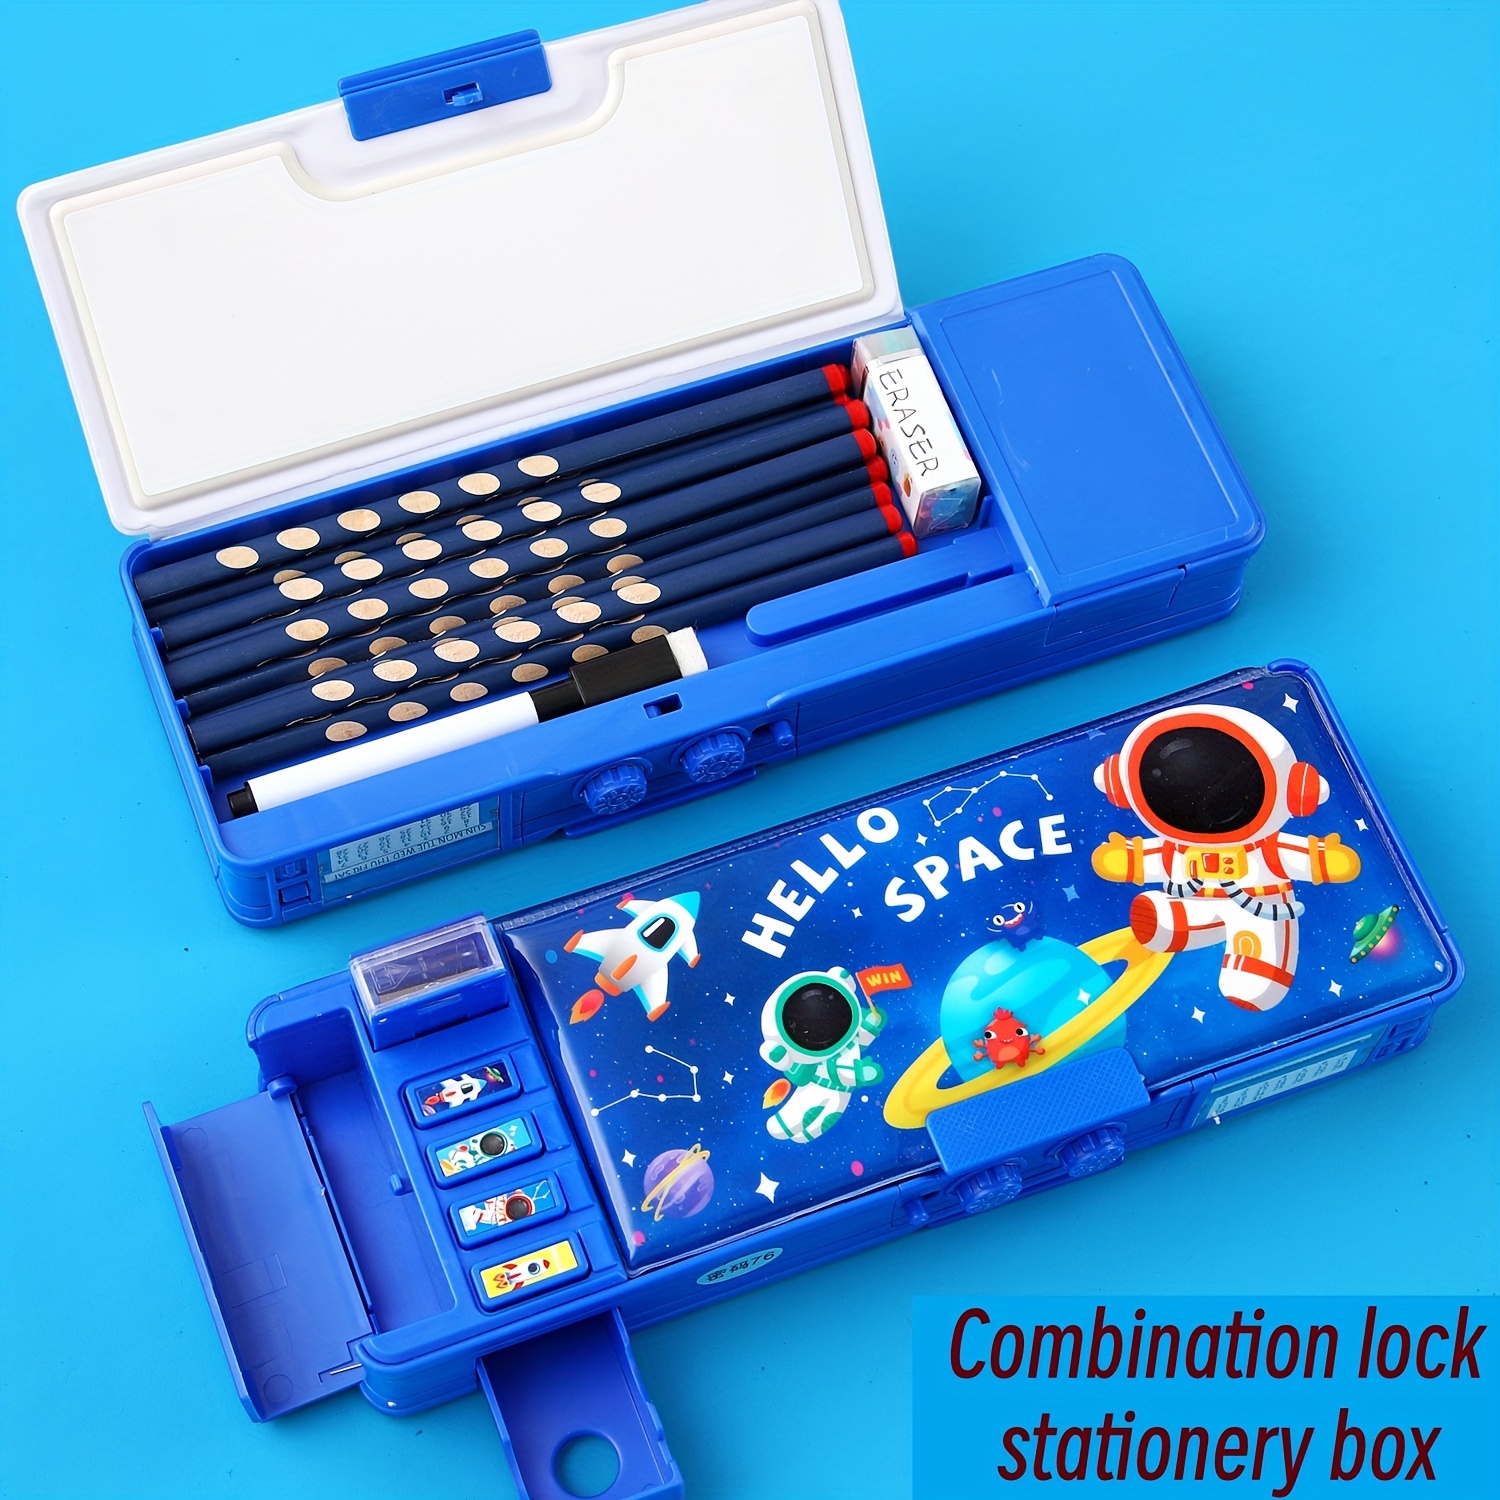 

Multi-function Pencil Box With Combination Lock - Perfect For Boys' School Supplies!